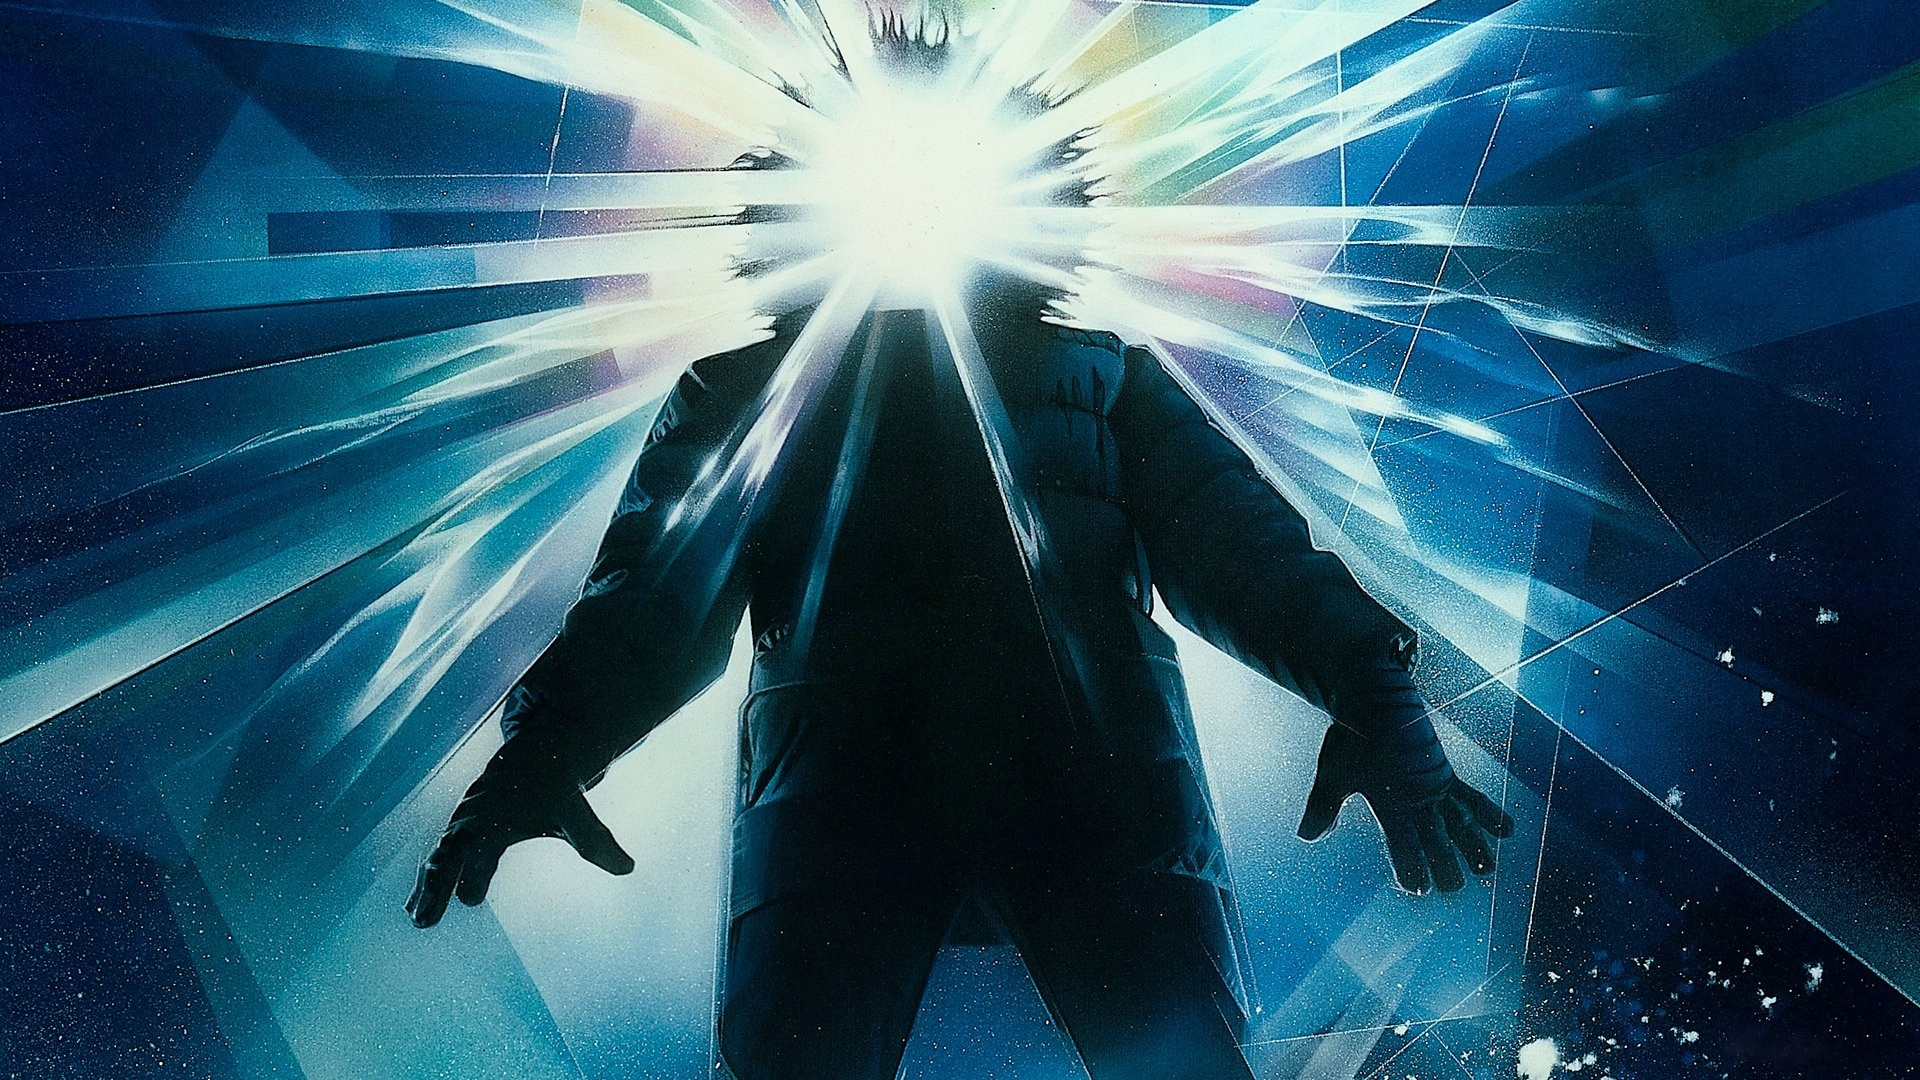 General 1920x1080 The Thing movie poster movies horror aliens abstract lines jacket gloves cyan blue shapes science fiction